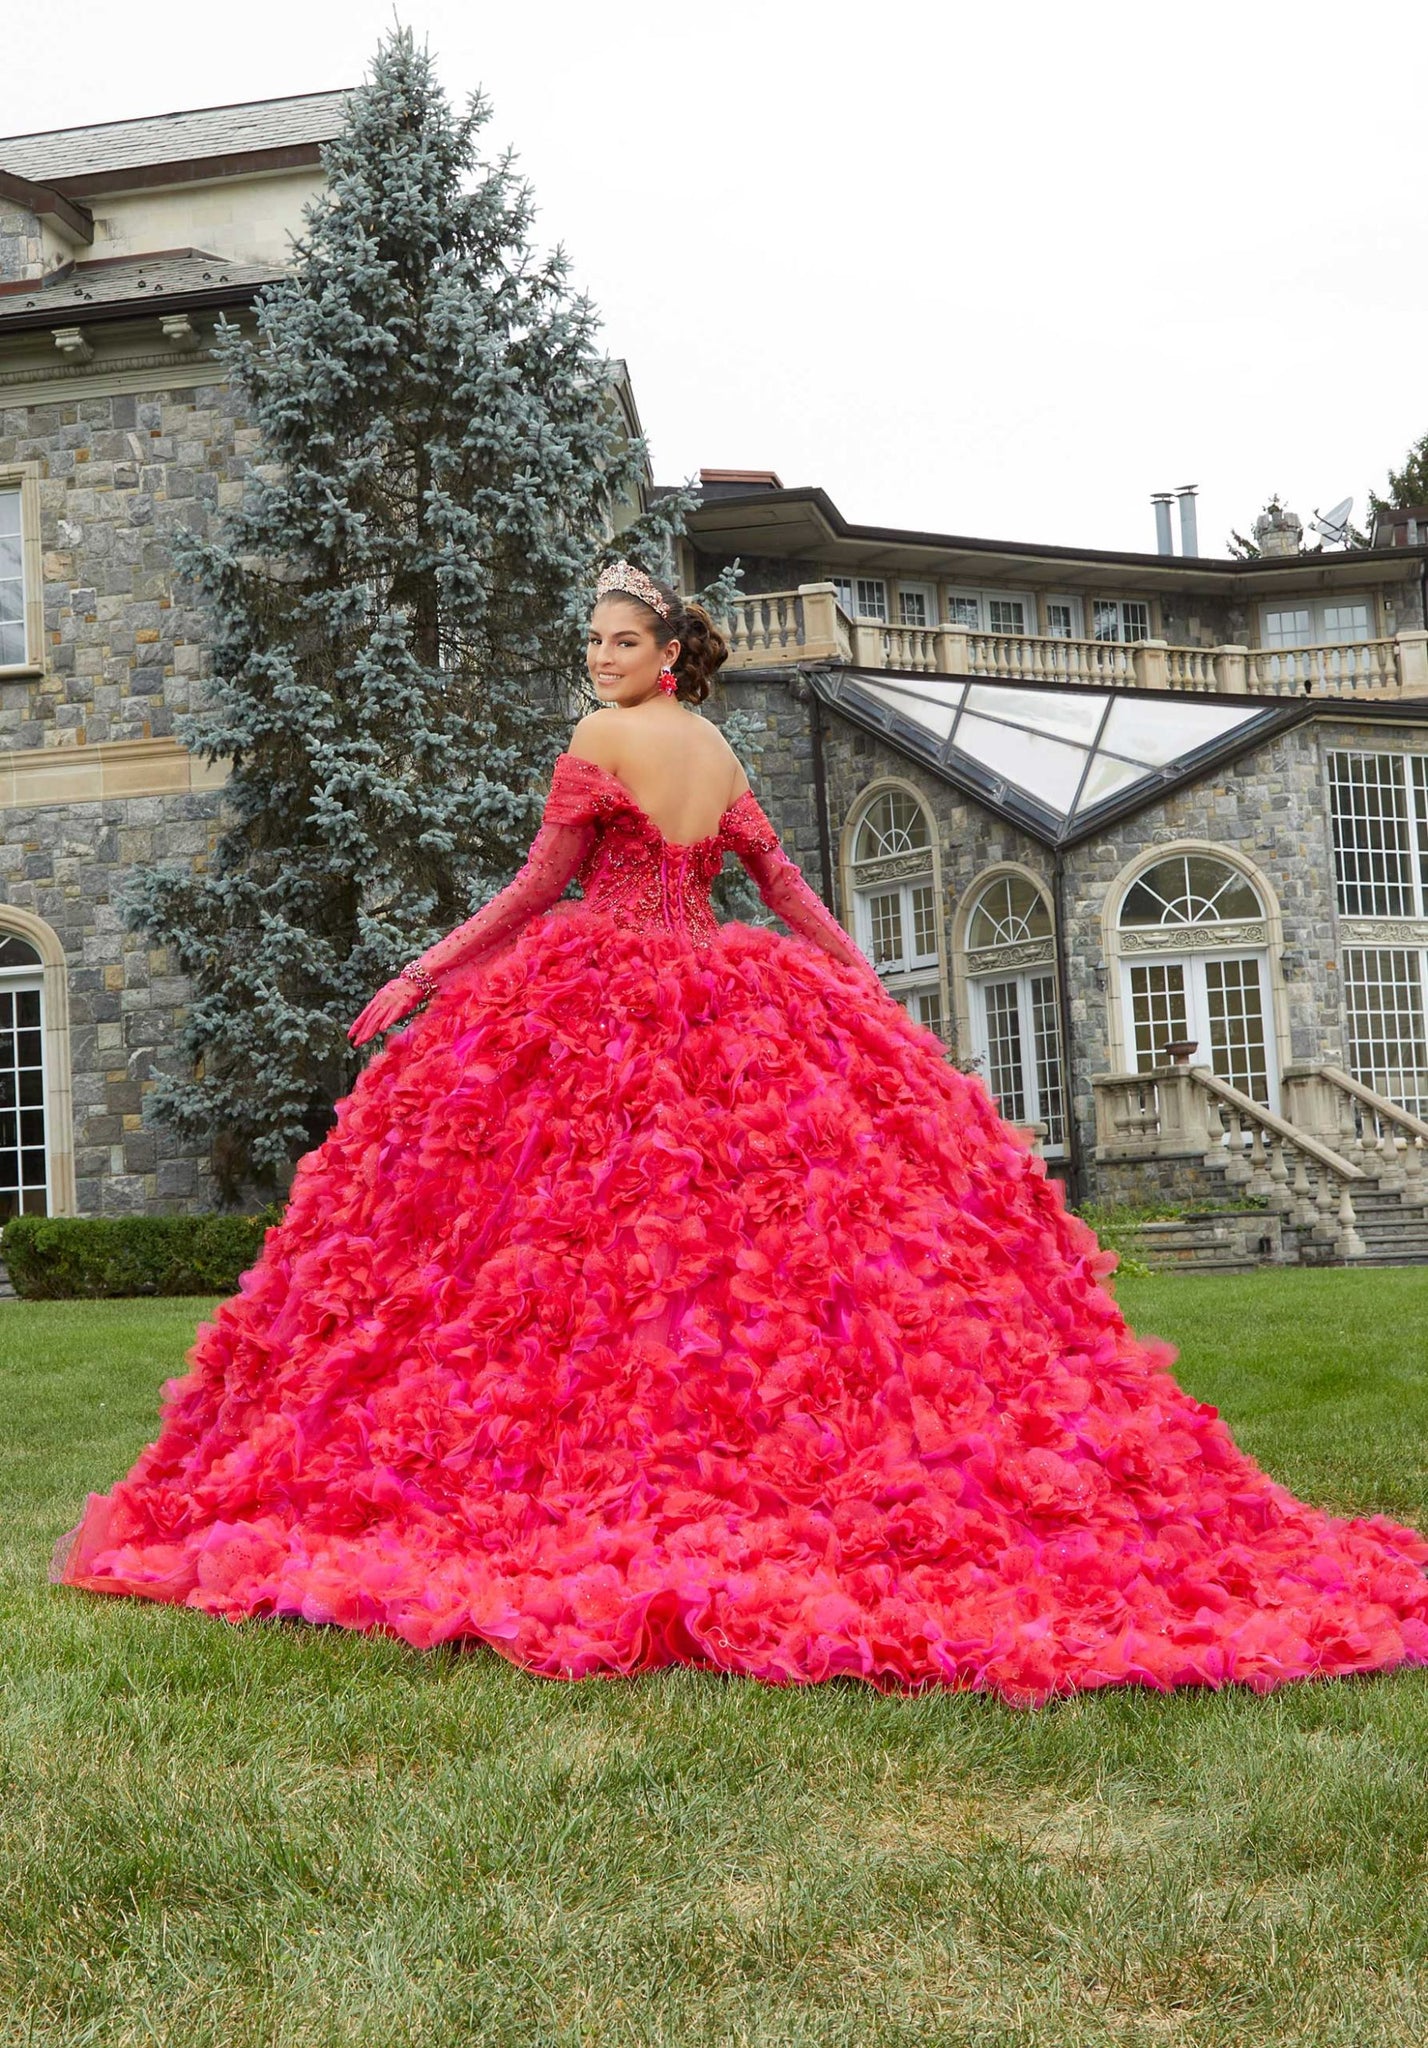 Three-Dimensional Floral Lace Quinceañera Dress with Floral Skirt